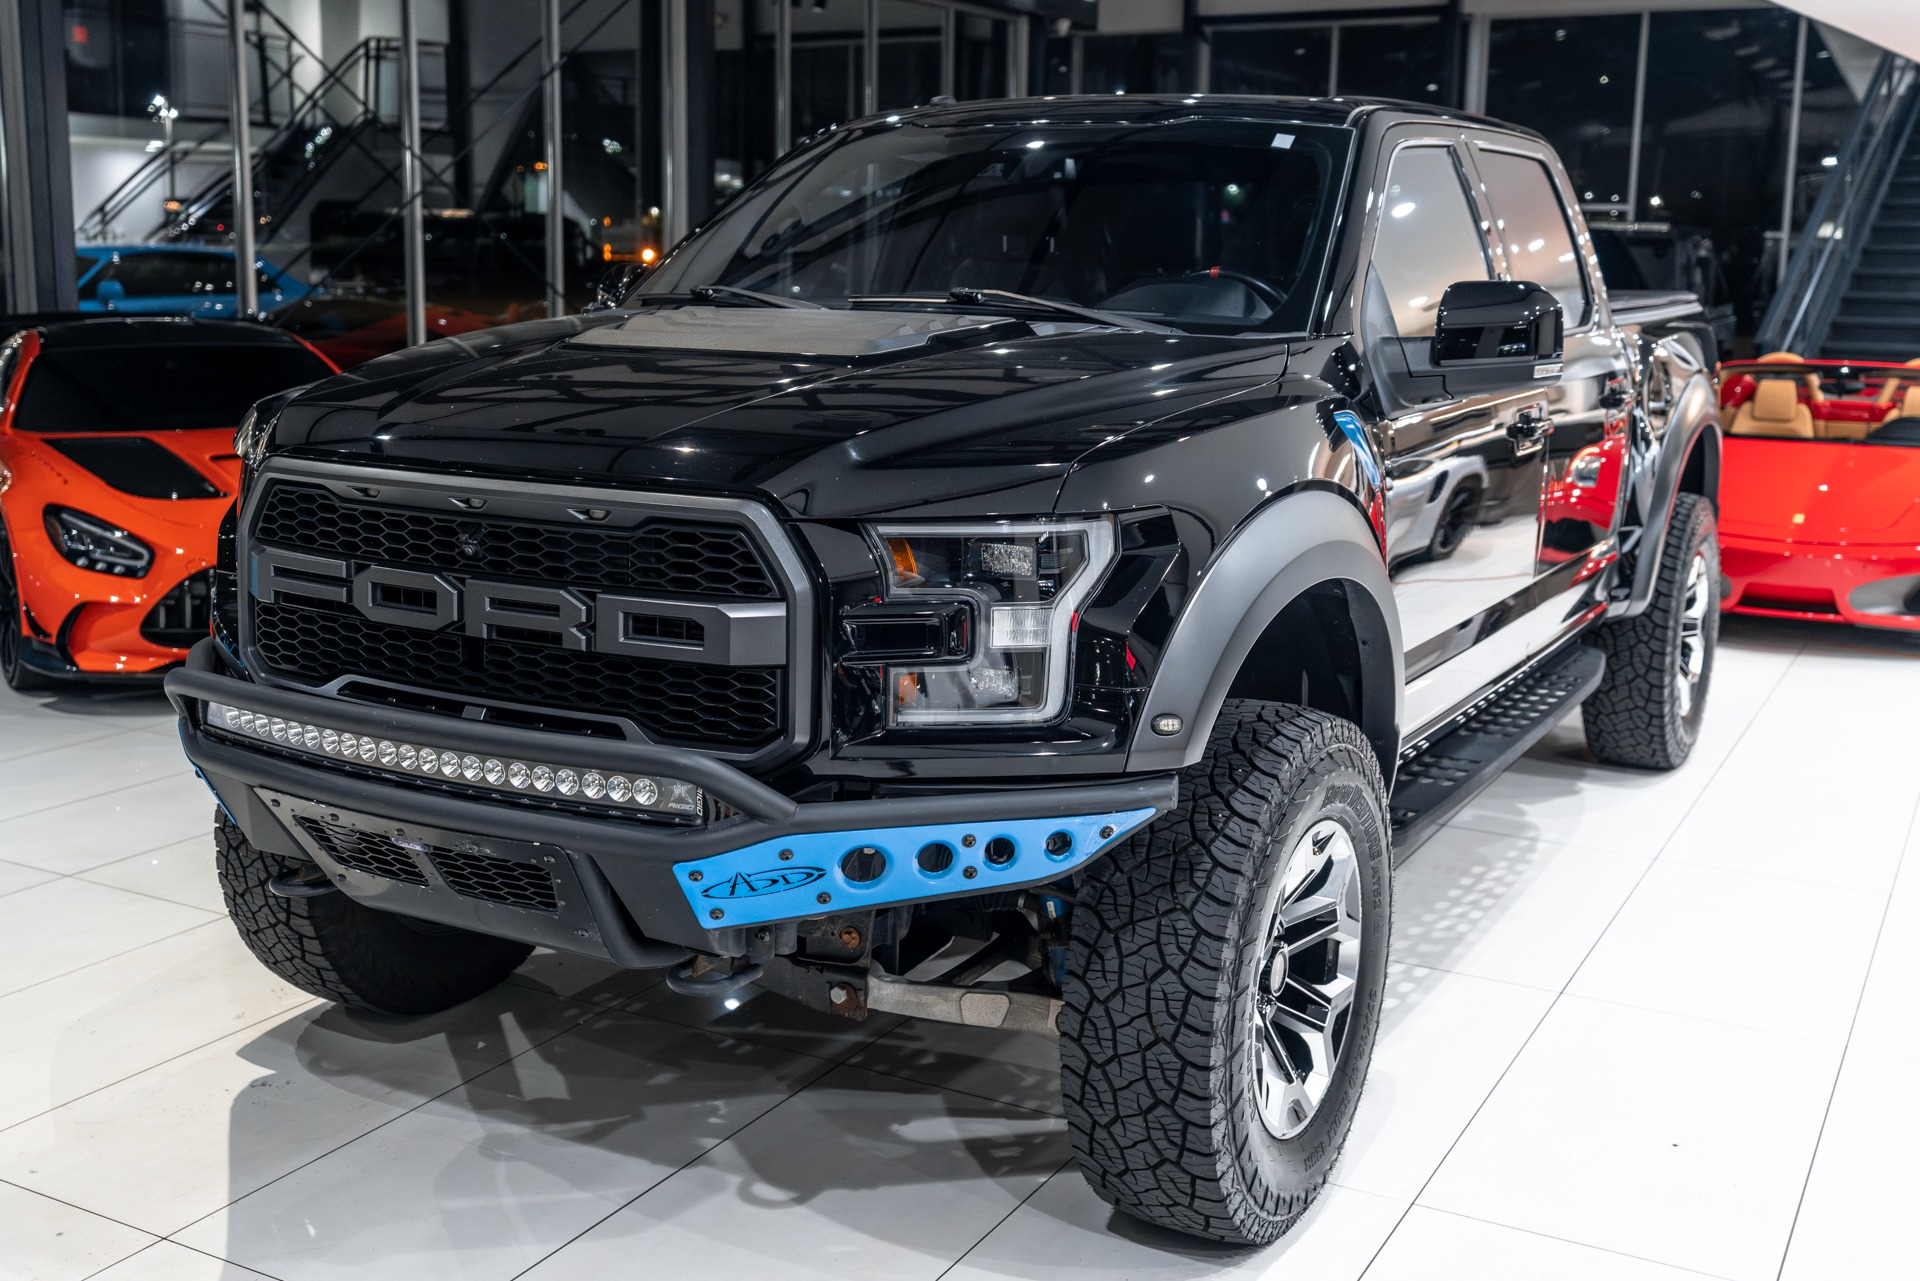 Used-2018-Ford-F-150-Raptor-4x4-Supercrew-Pick-Up-SCA-Performance-Pkg-802A-Equipment-Group